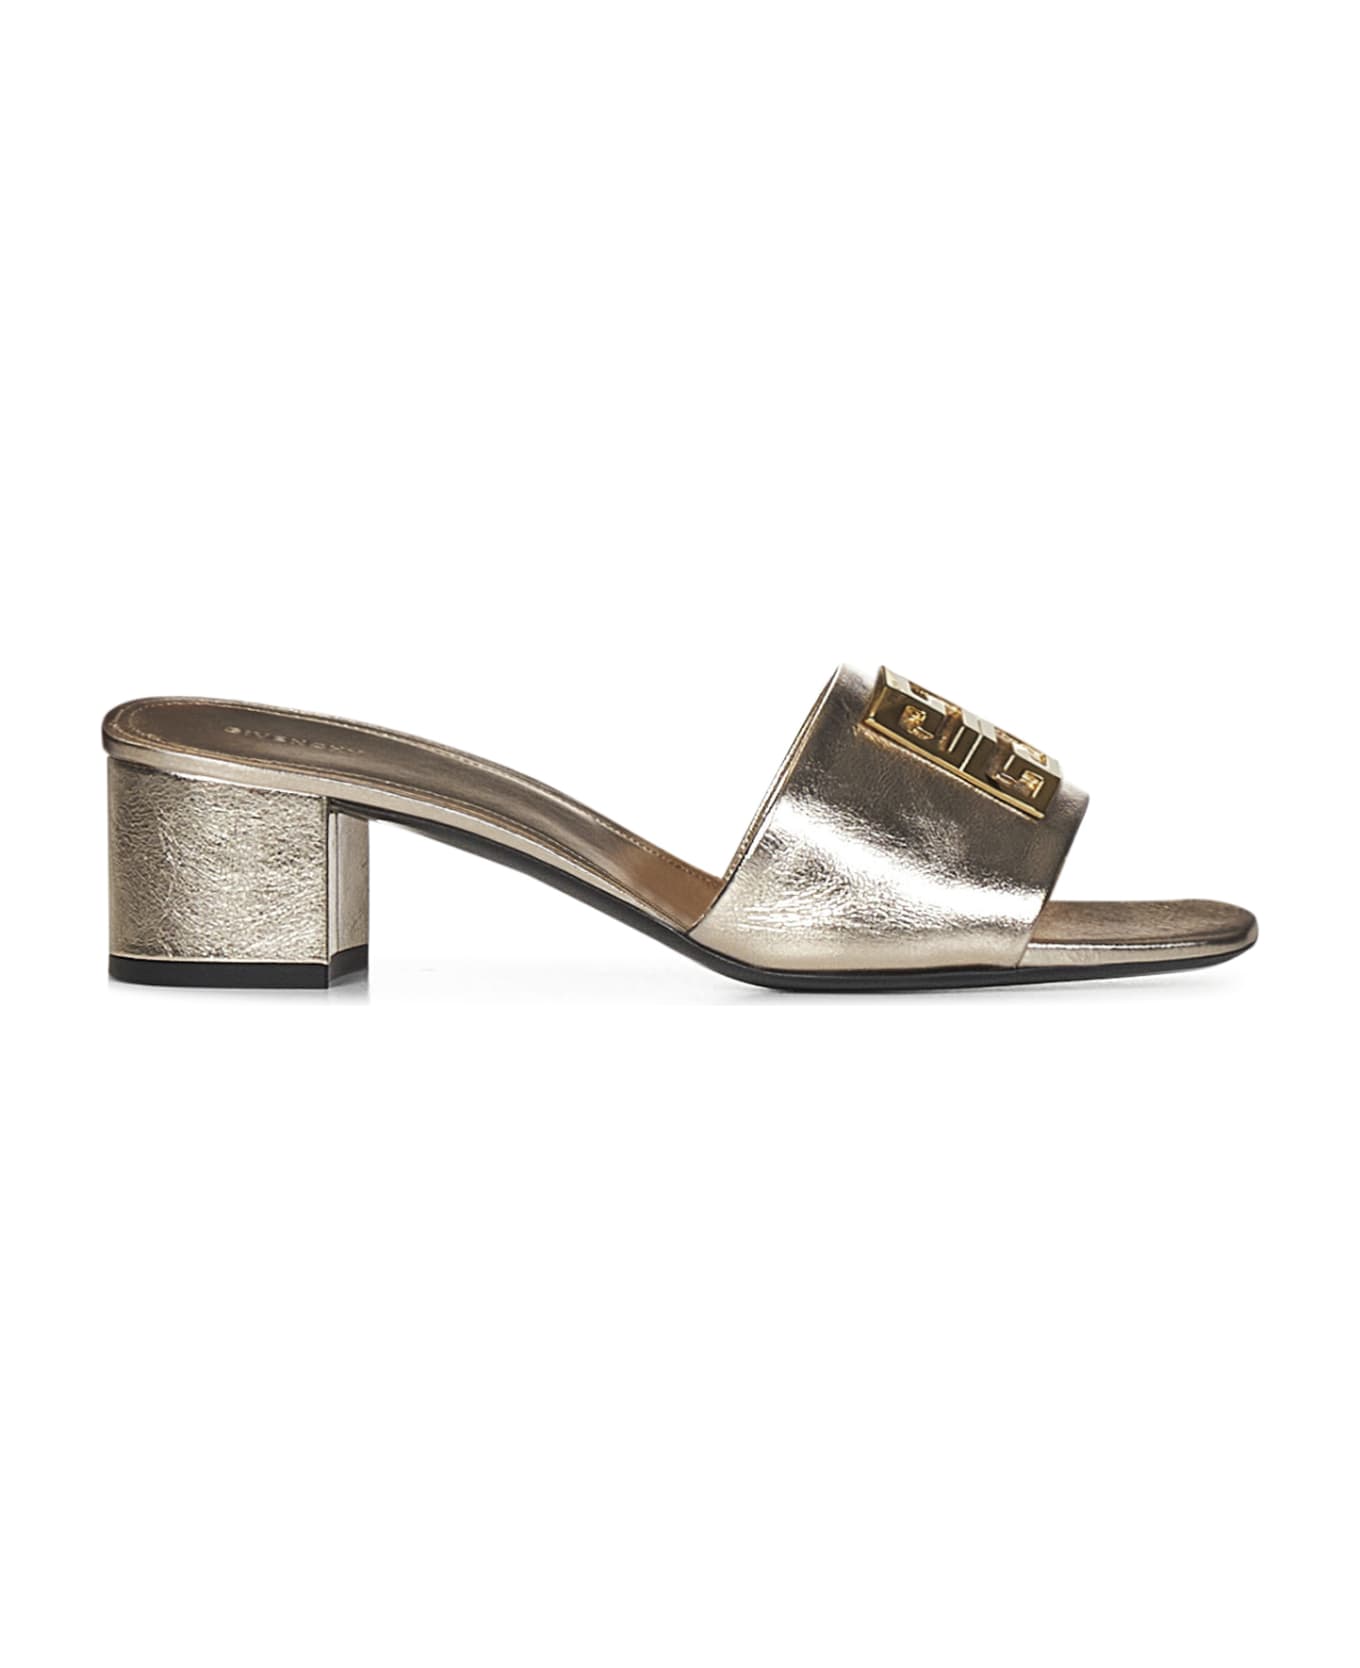 Givenchy 4g Heel Sandals - Gold